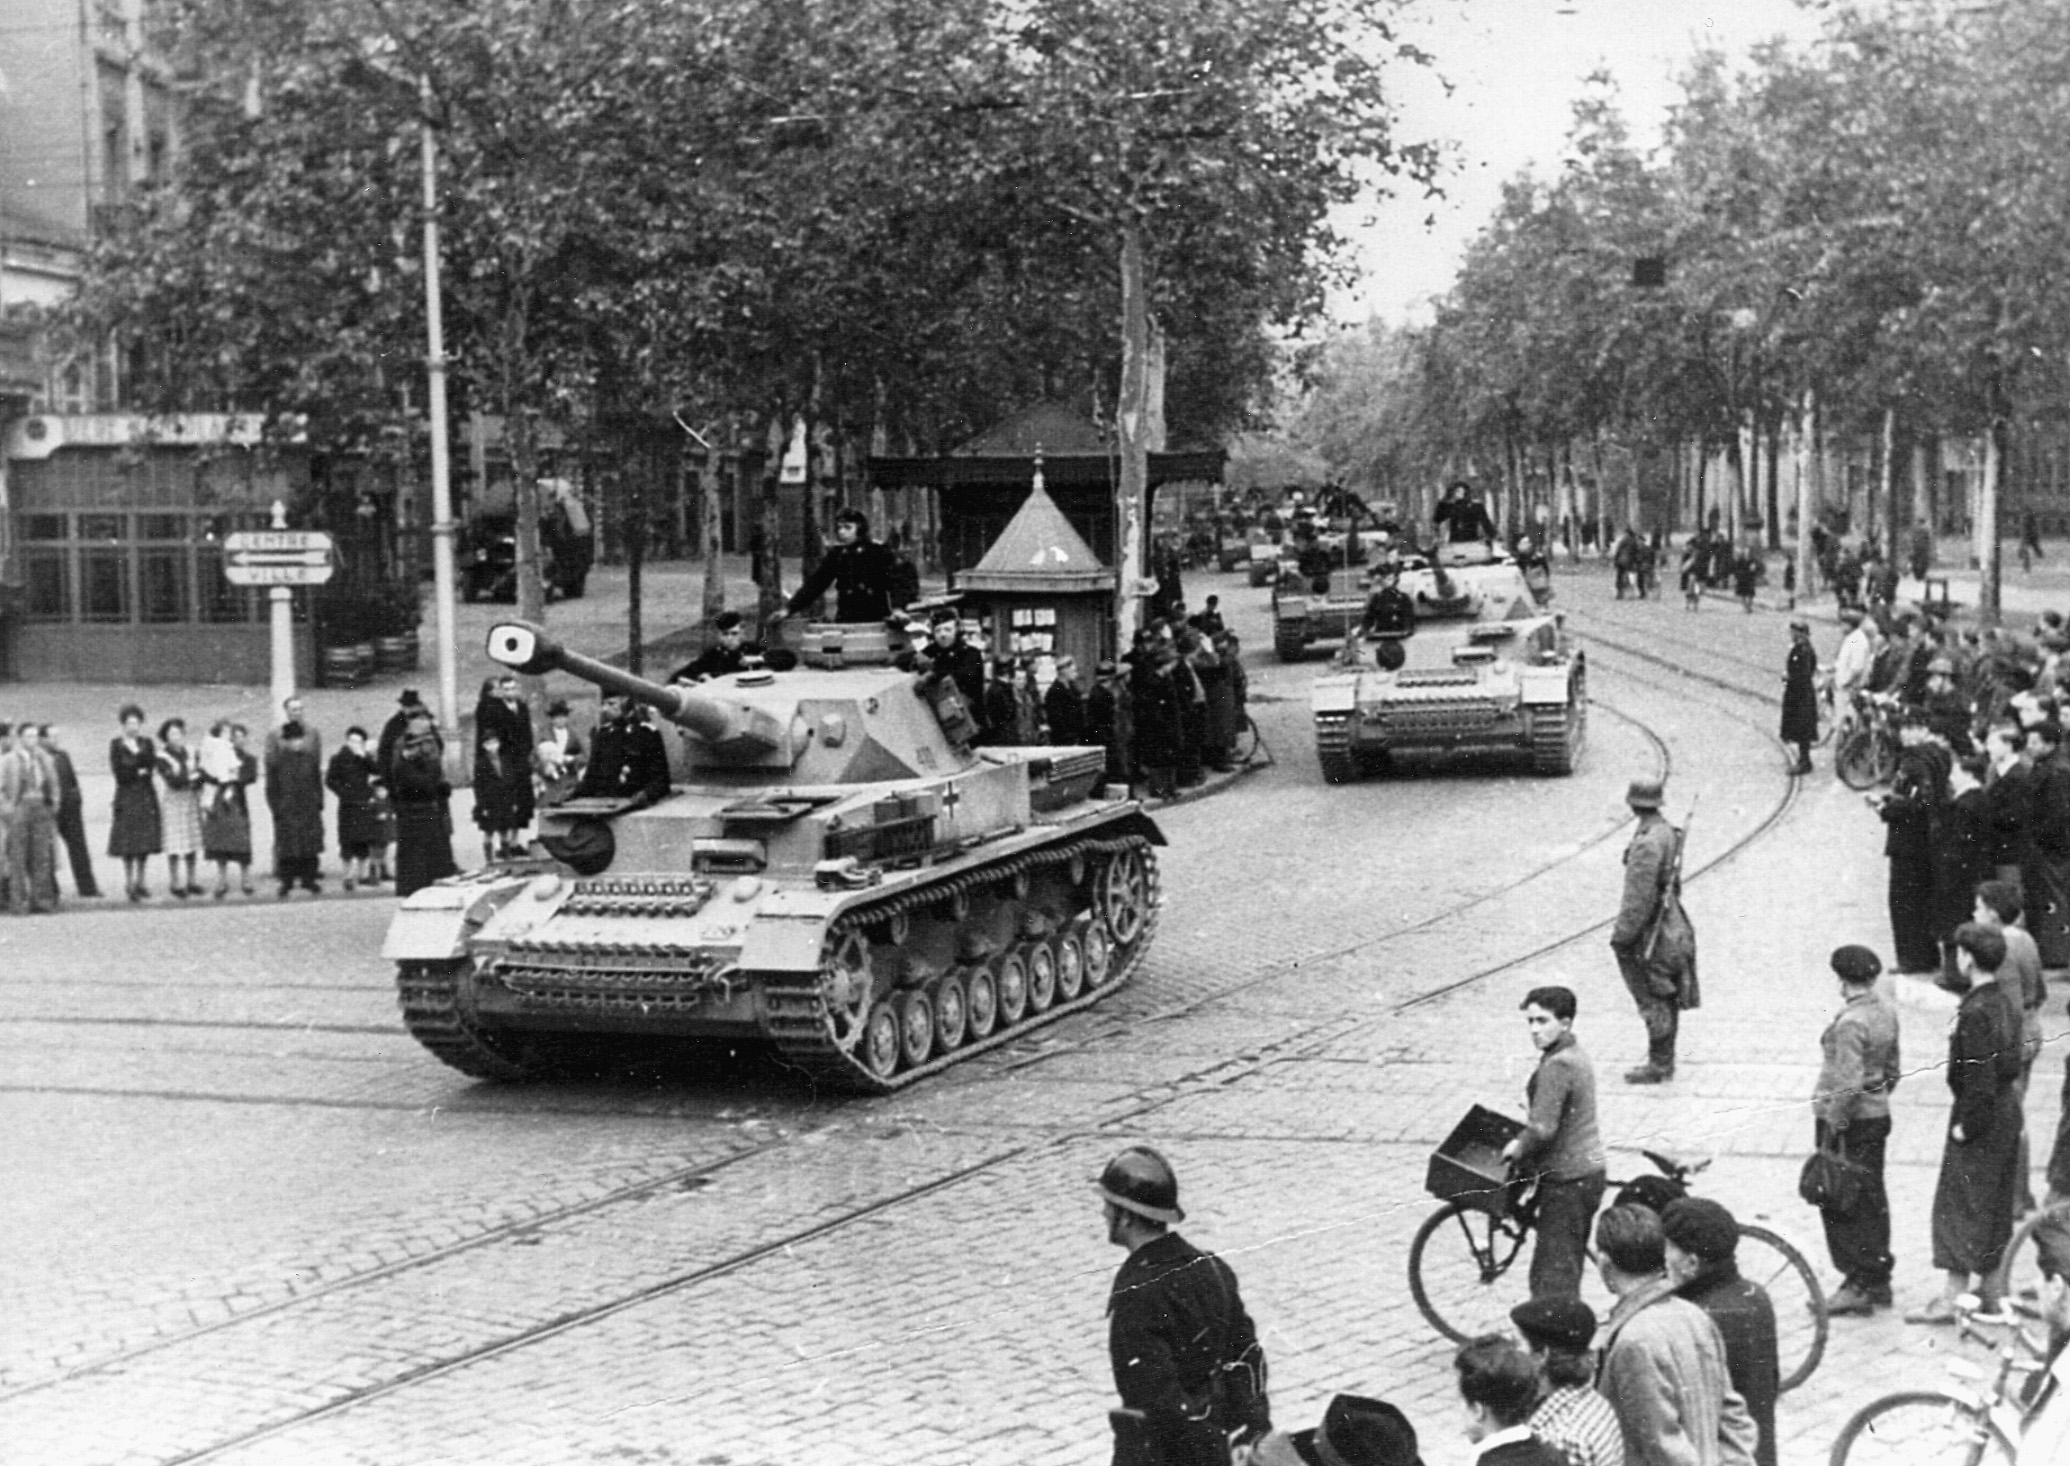 German Mark III tanks parade down a city street in Toulouse, France. 